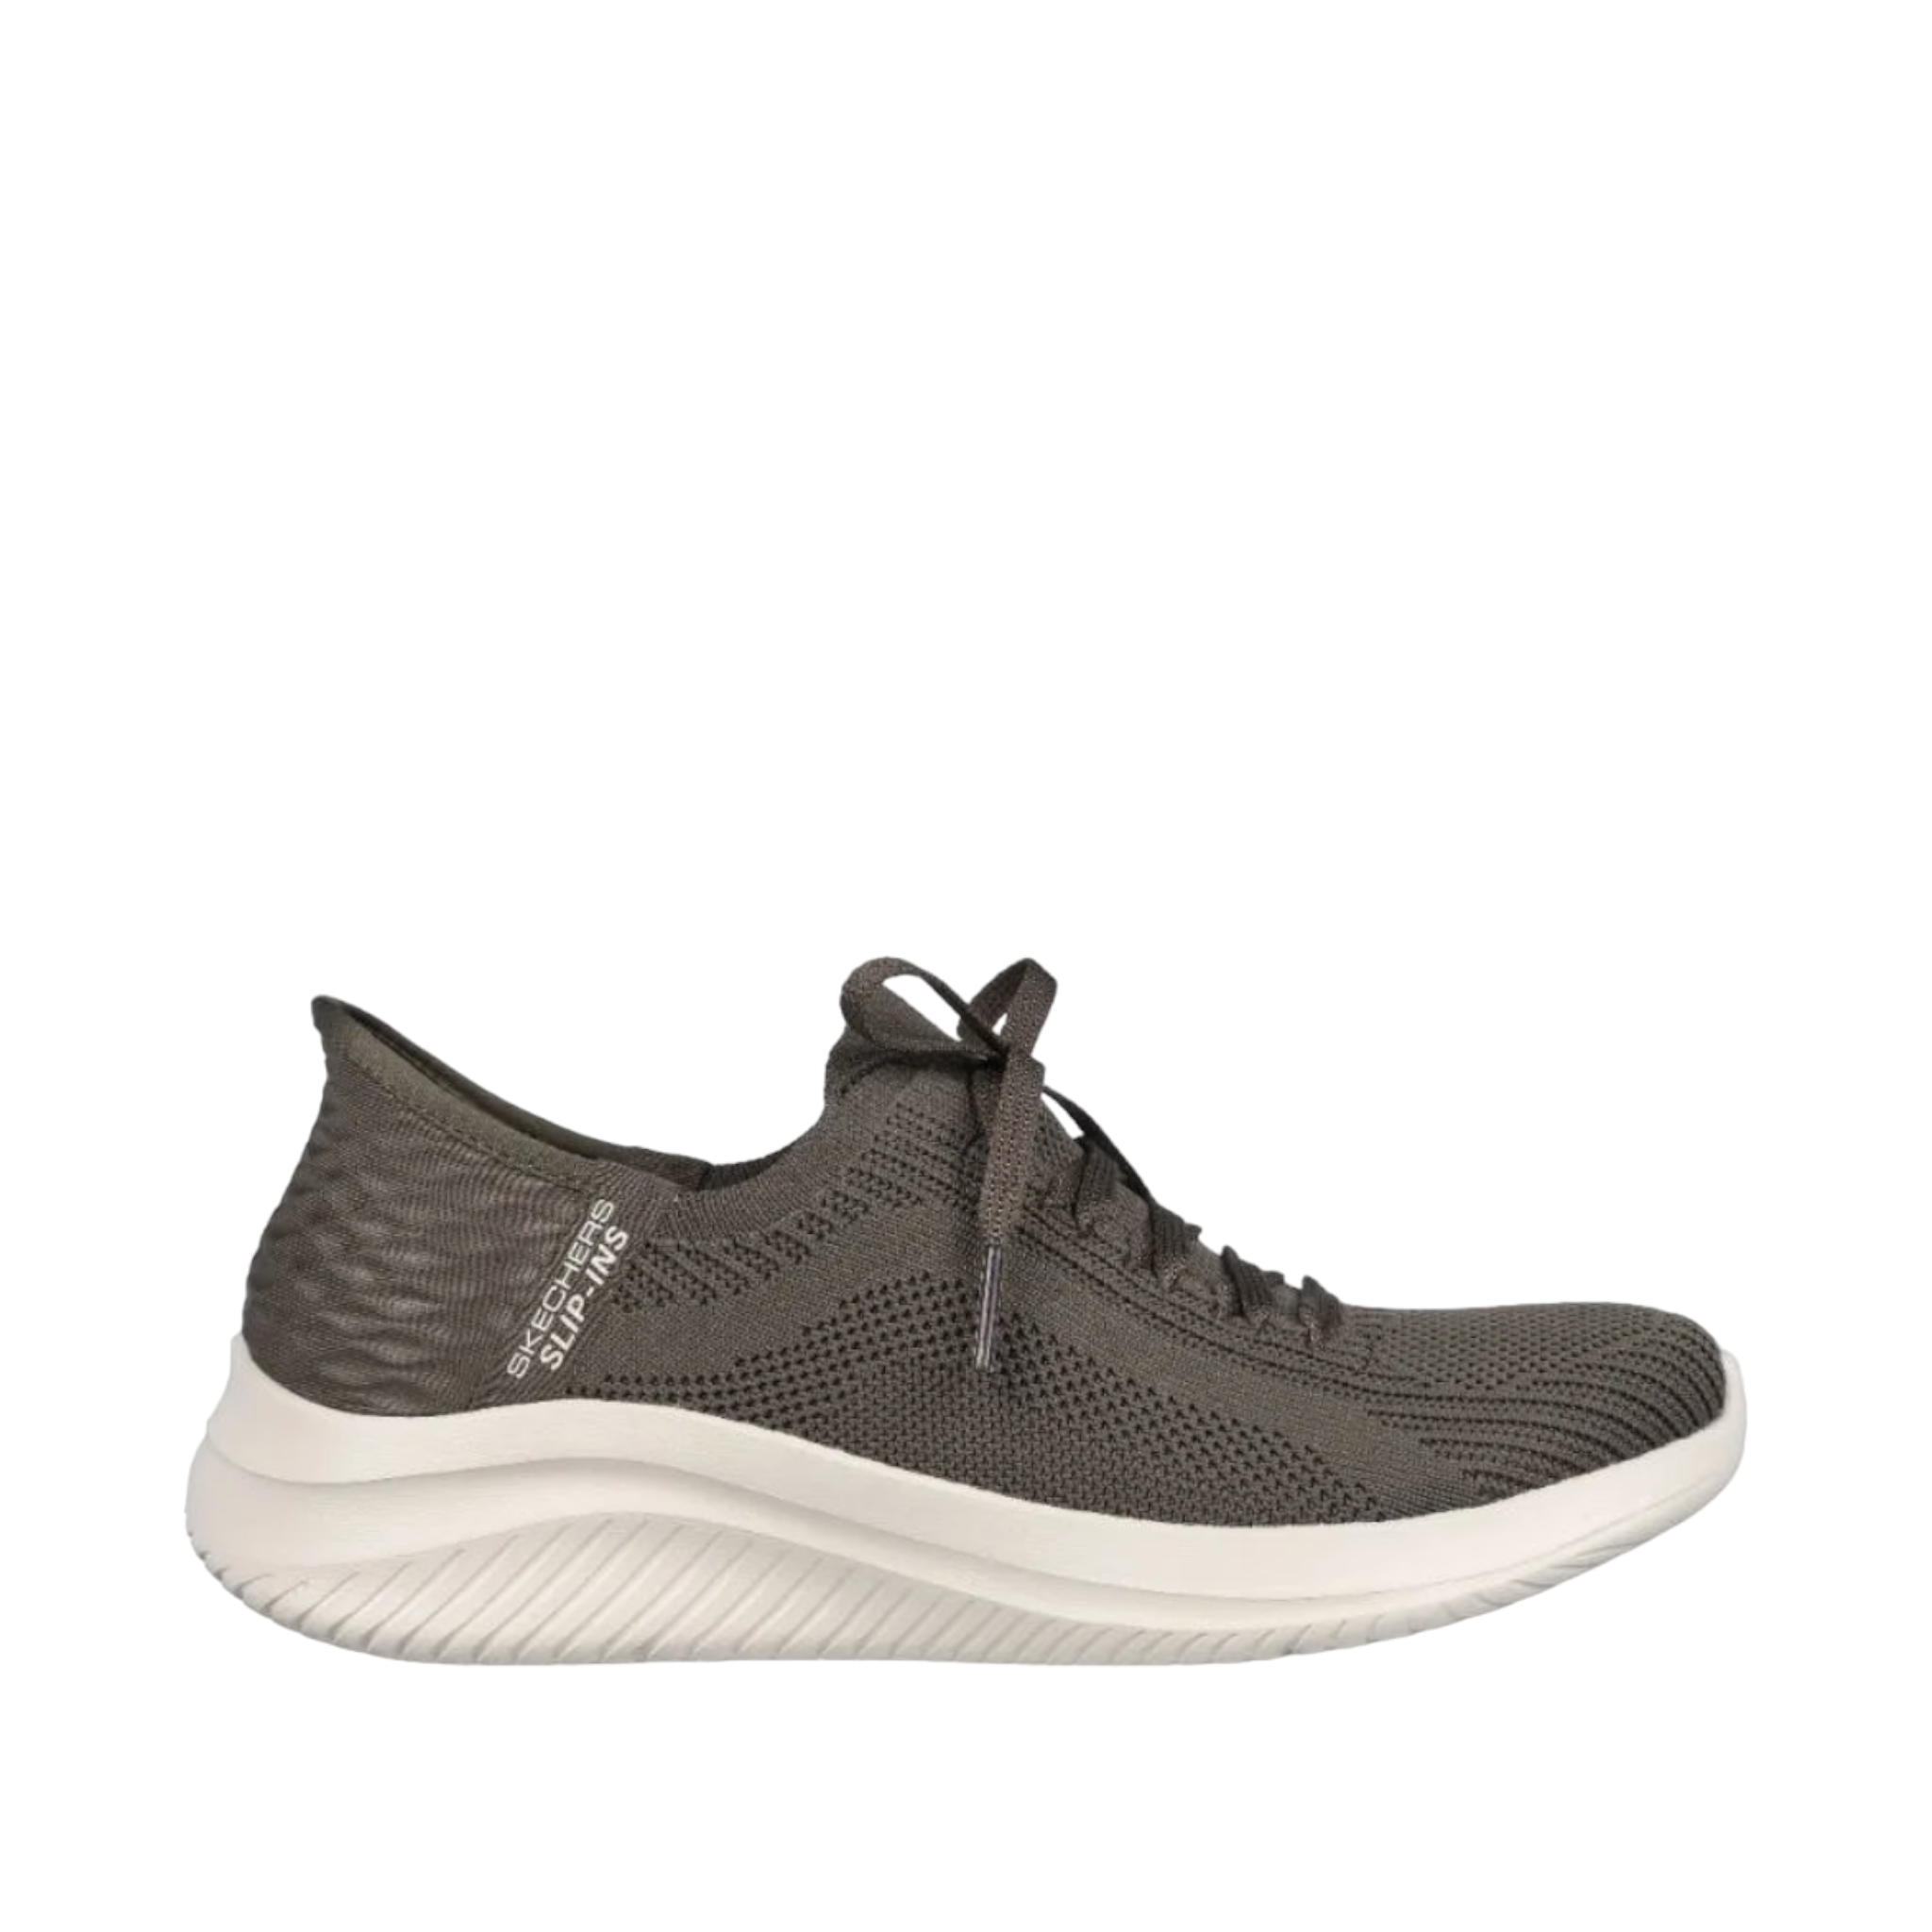 Shop Brilliant Path Skechers - with shoe&me - from Skechers - Sneakers - Sneaker, Winter, Womens - [collection]